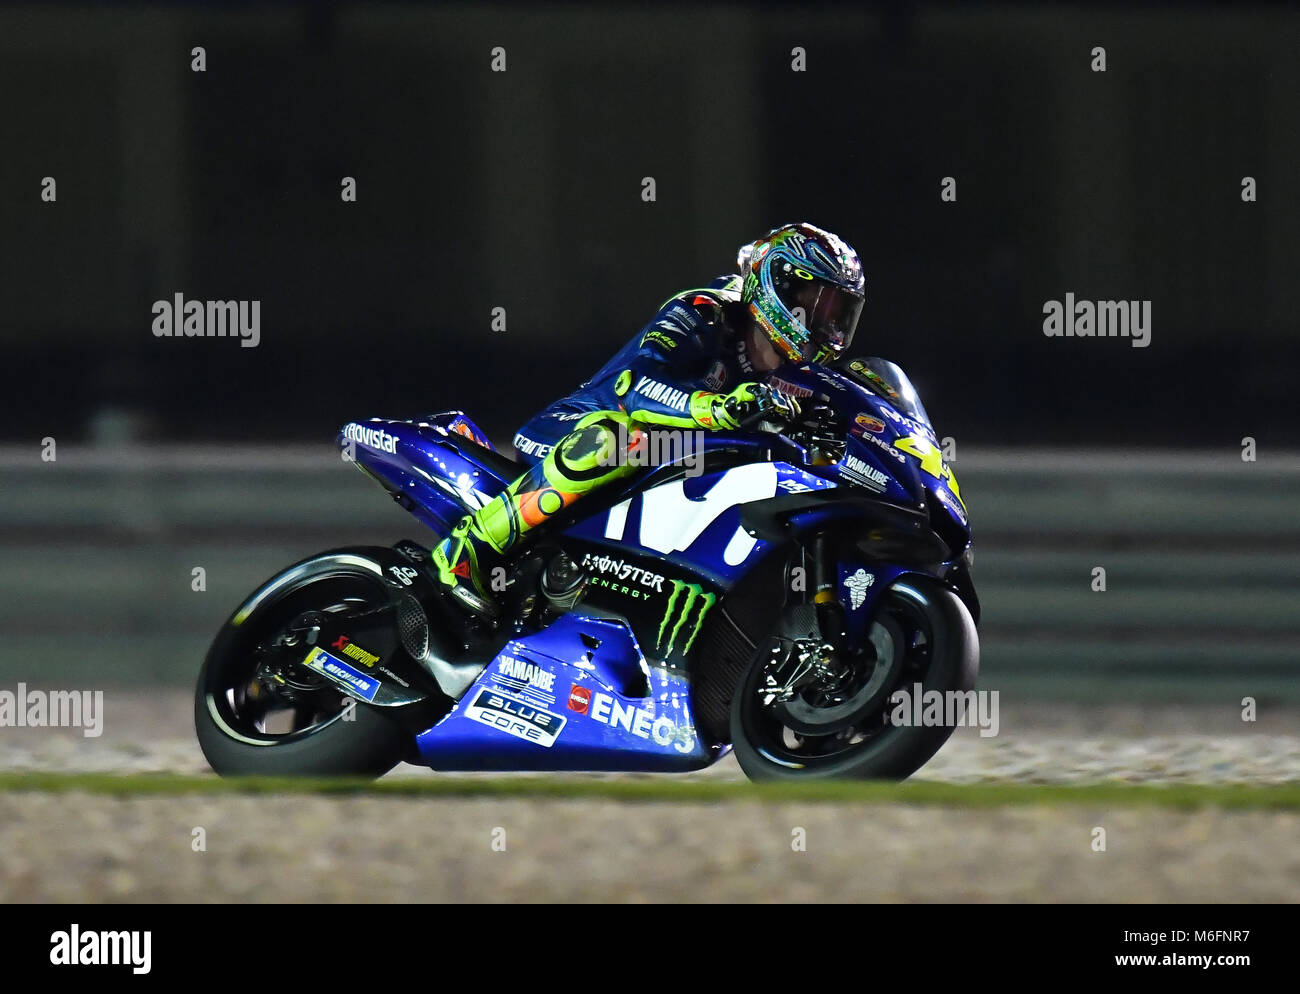 Italian MotoGP rider Valentino Rossi powers his Yamaha during a qualifying  practice session in Malaysia's Sepang. Italian MotoGP rider Valentino Rossi  powers his Yamaha during a qualifying practice session at Malaysia's Sepang